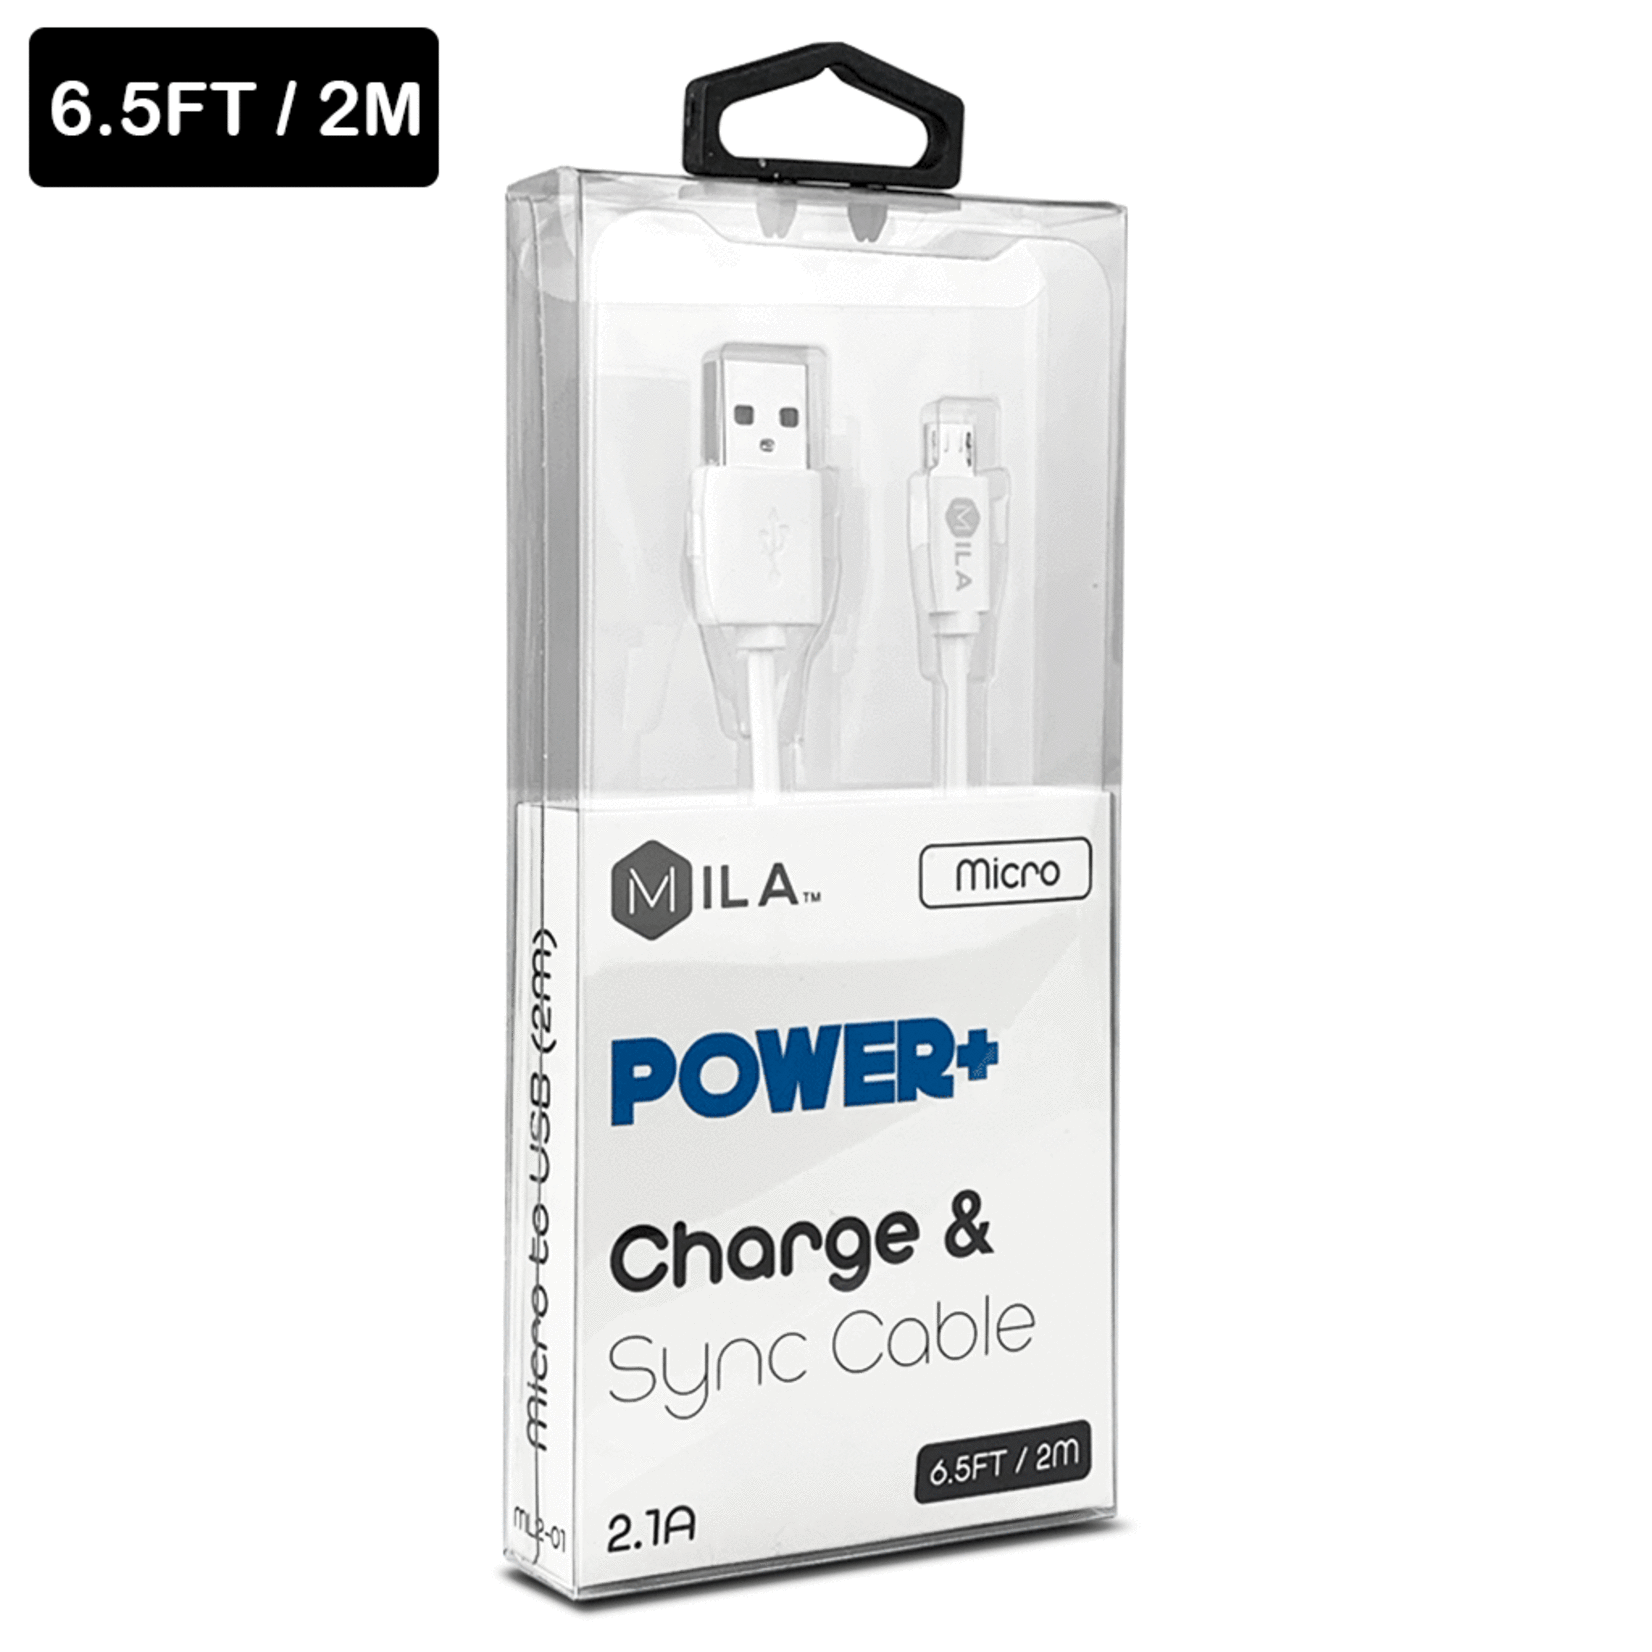 MILA | Micro V9 POWER+ Charge & Sync Cable White 6.5 FT / 2M Retail Packaging